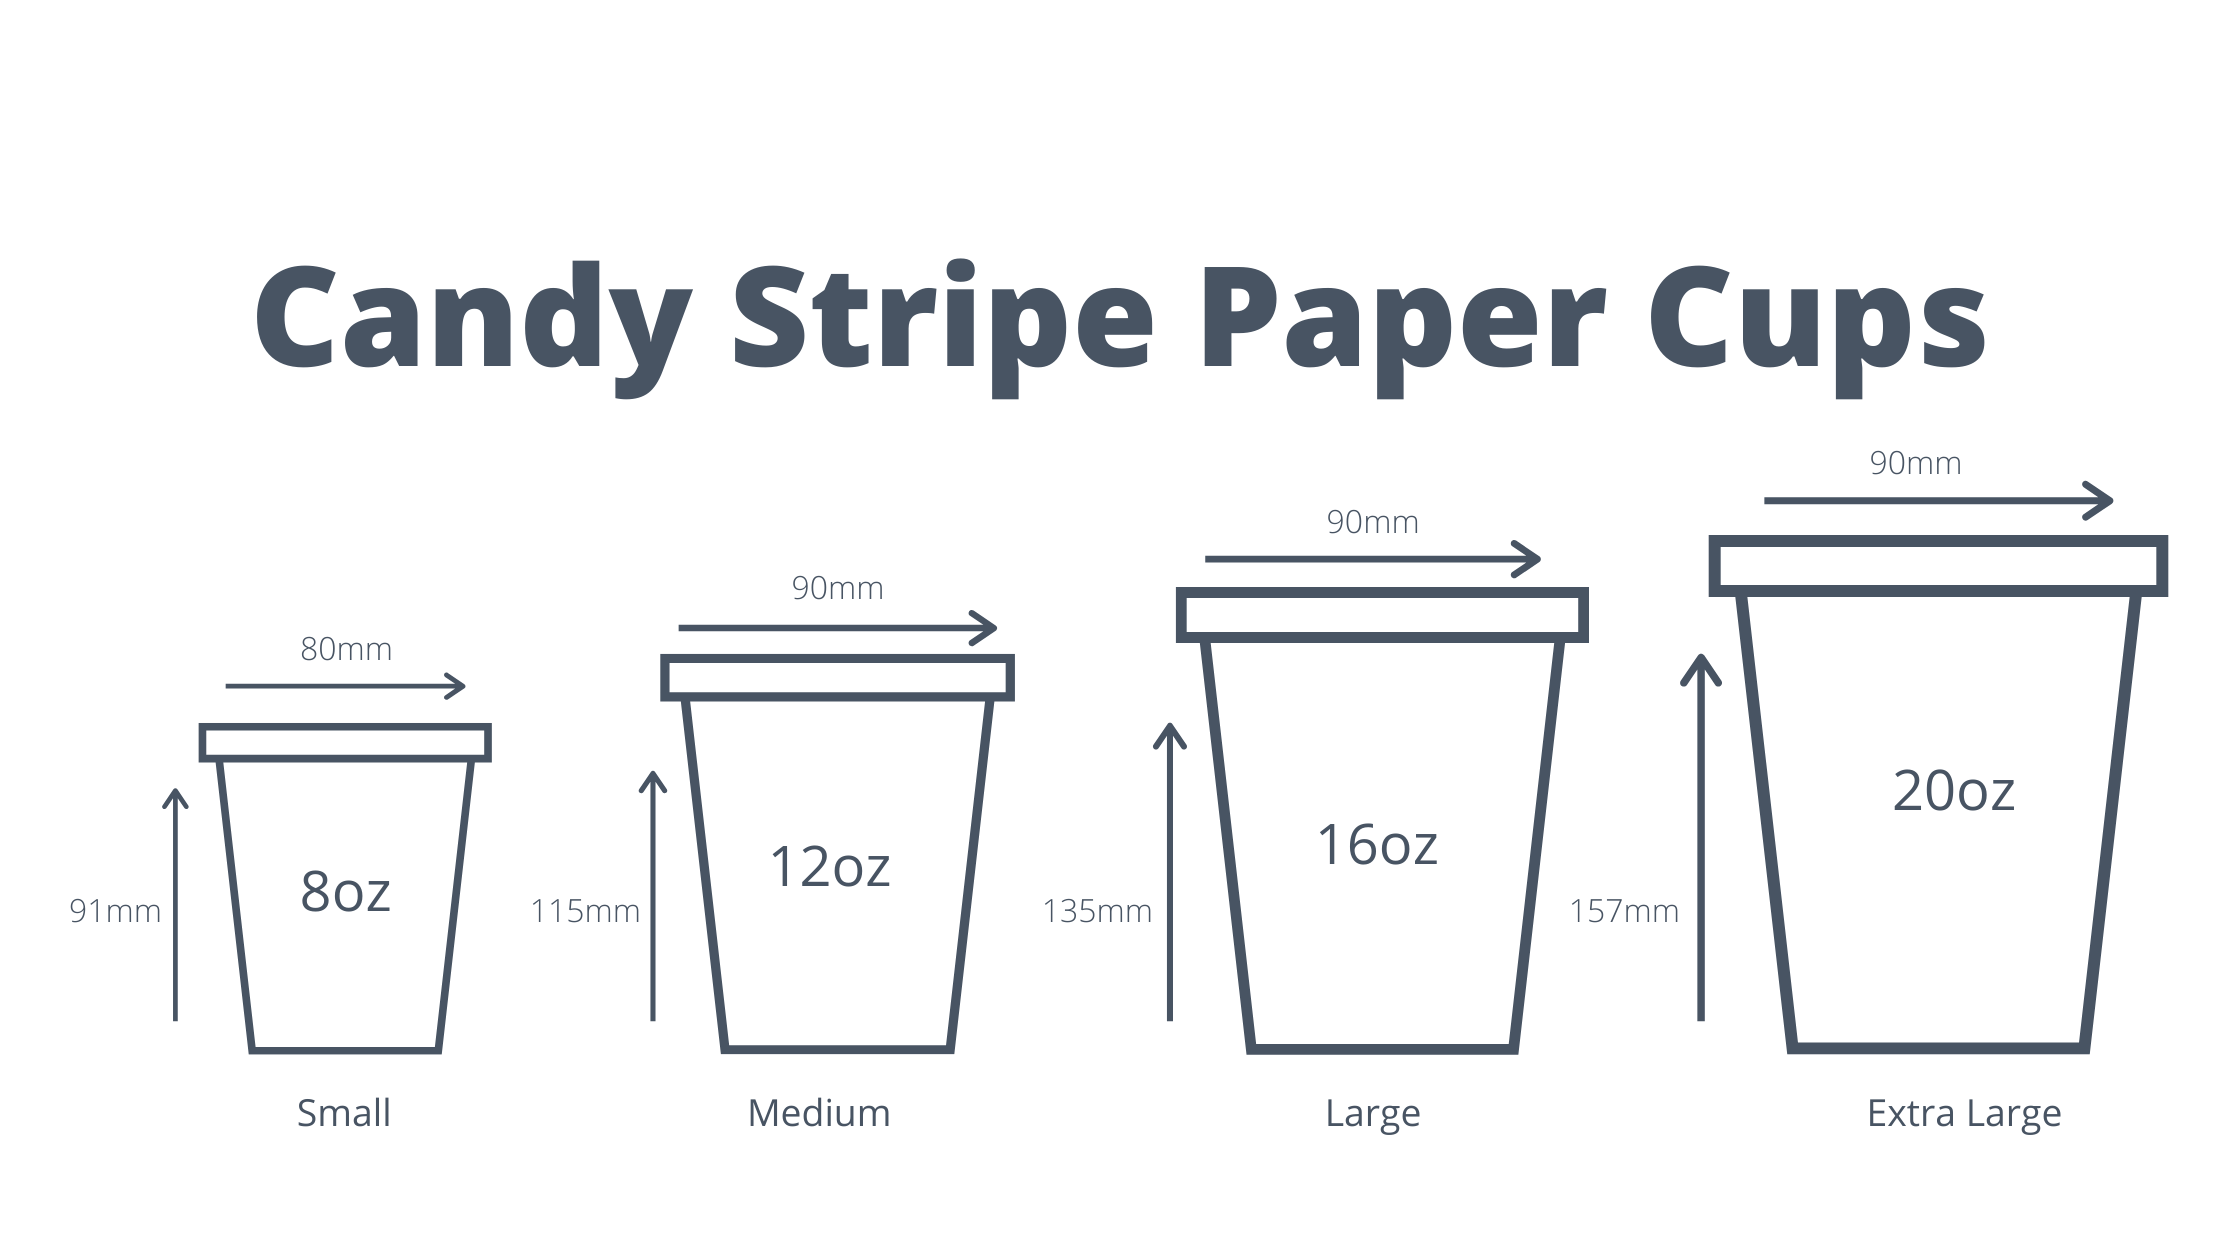 https://papercupcompany.com/wp-content/uploads/2017/07/Candy-Stripe-Cup-Size.png